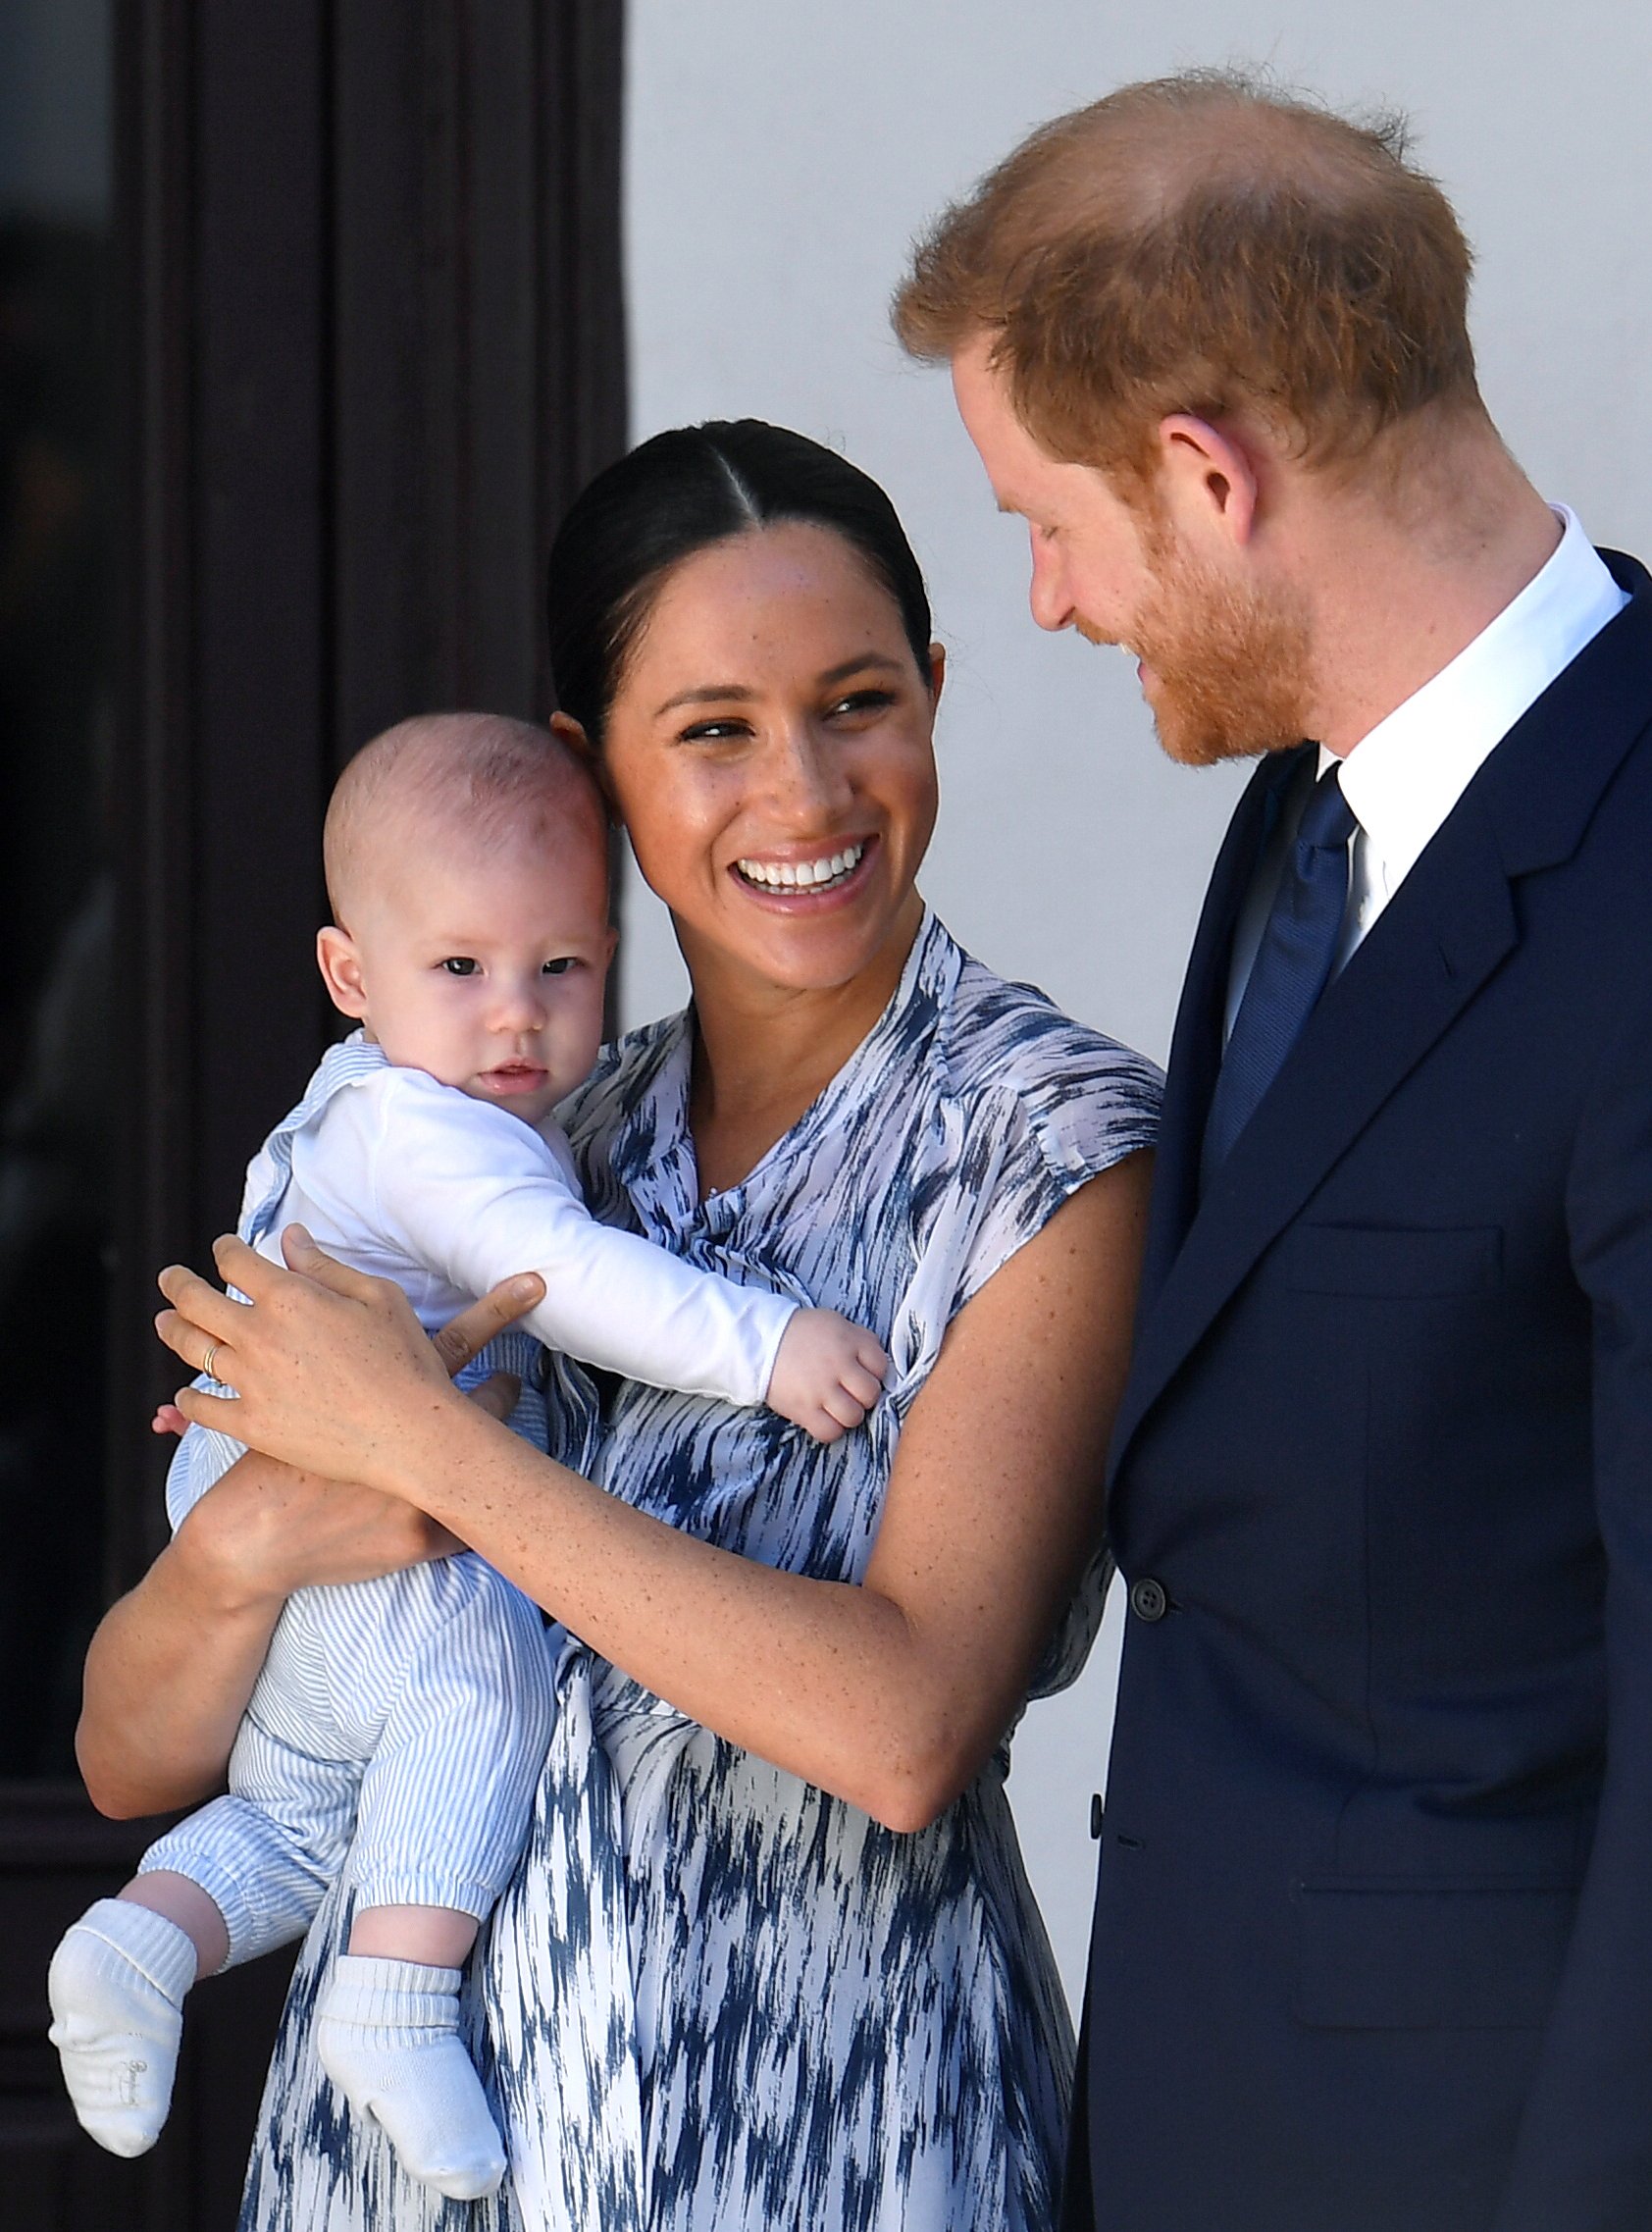 Prince Harry, Duchess Meghan, and their baby son Archie Mountbatten-Windsor at the Desmond & Leah Tutu Legacy Foundation during their royal tour of South Africa on September 25, 2019, in Cape Town, South Africa. | Source: Toby Melville - Pool/Getty Images